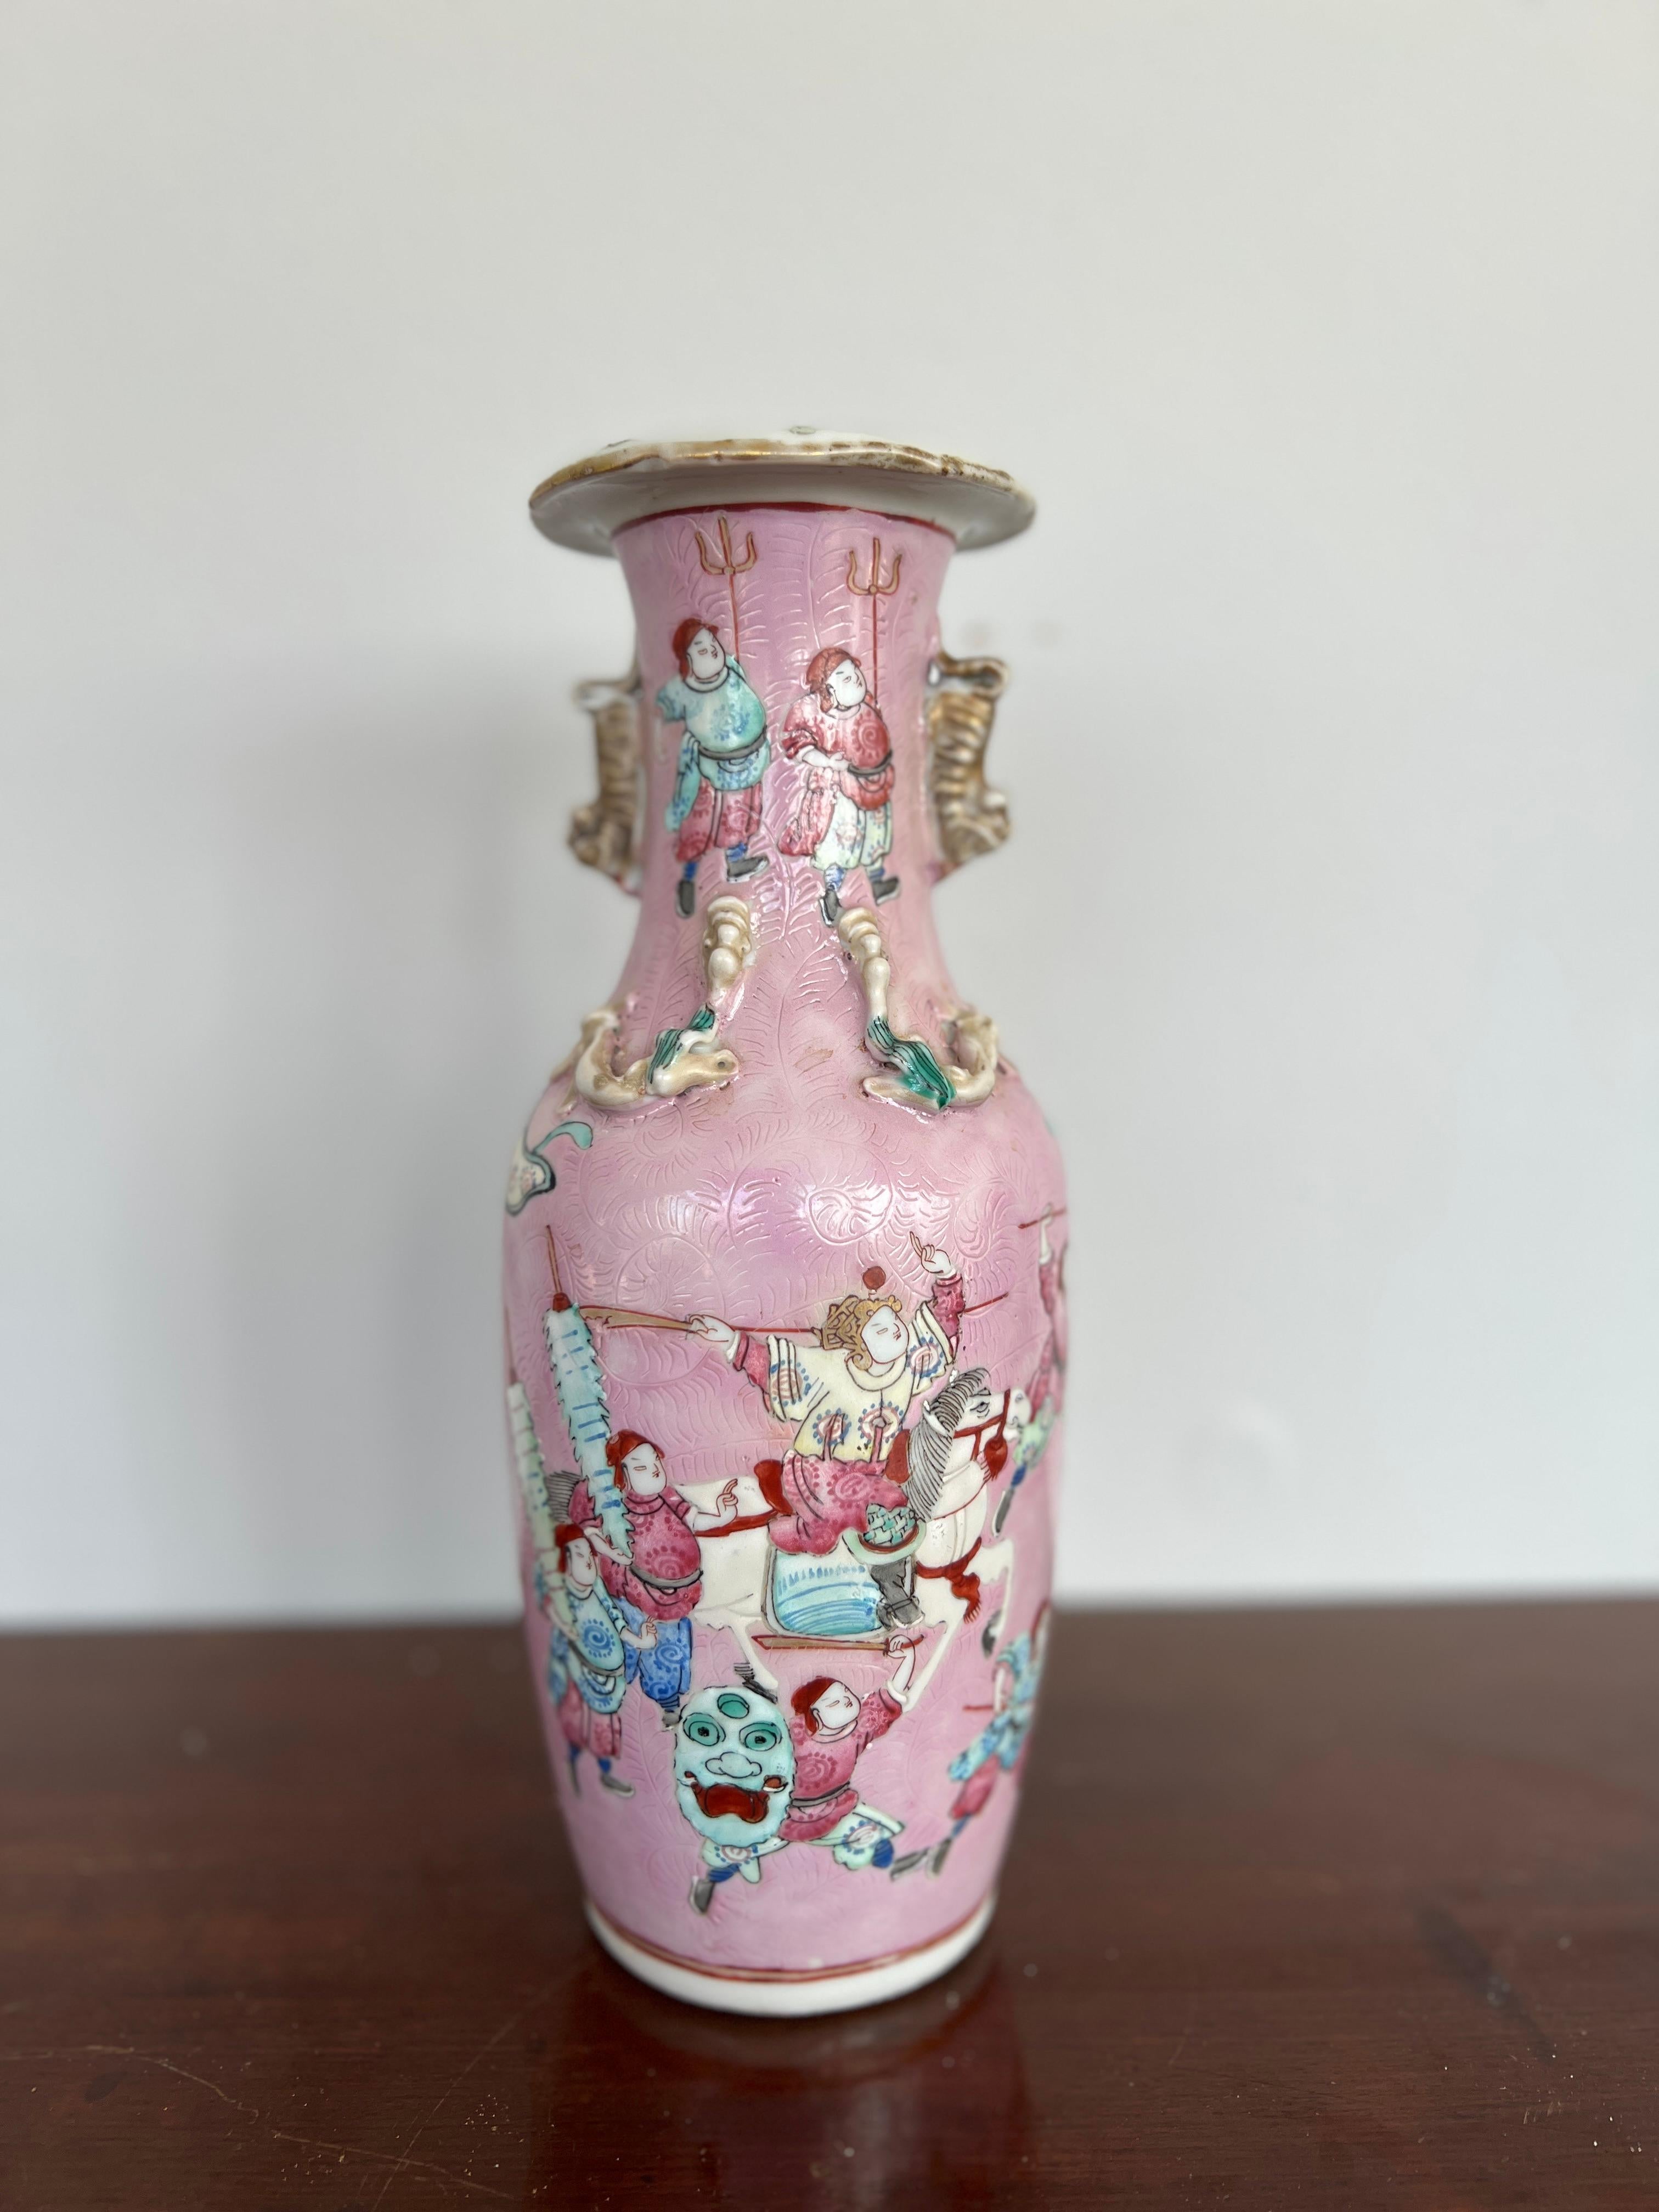 Chinese, 19th century,

A fantastic quality antique Chinese porcelain vase. The vase is decorated in the Famille rose pattern with pink enamel ground, foo dog handles, carving to enamel surface and a scene of warriors across surface. Unmarked to